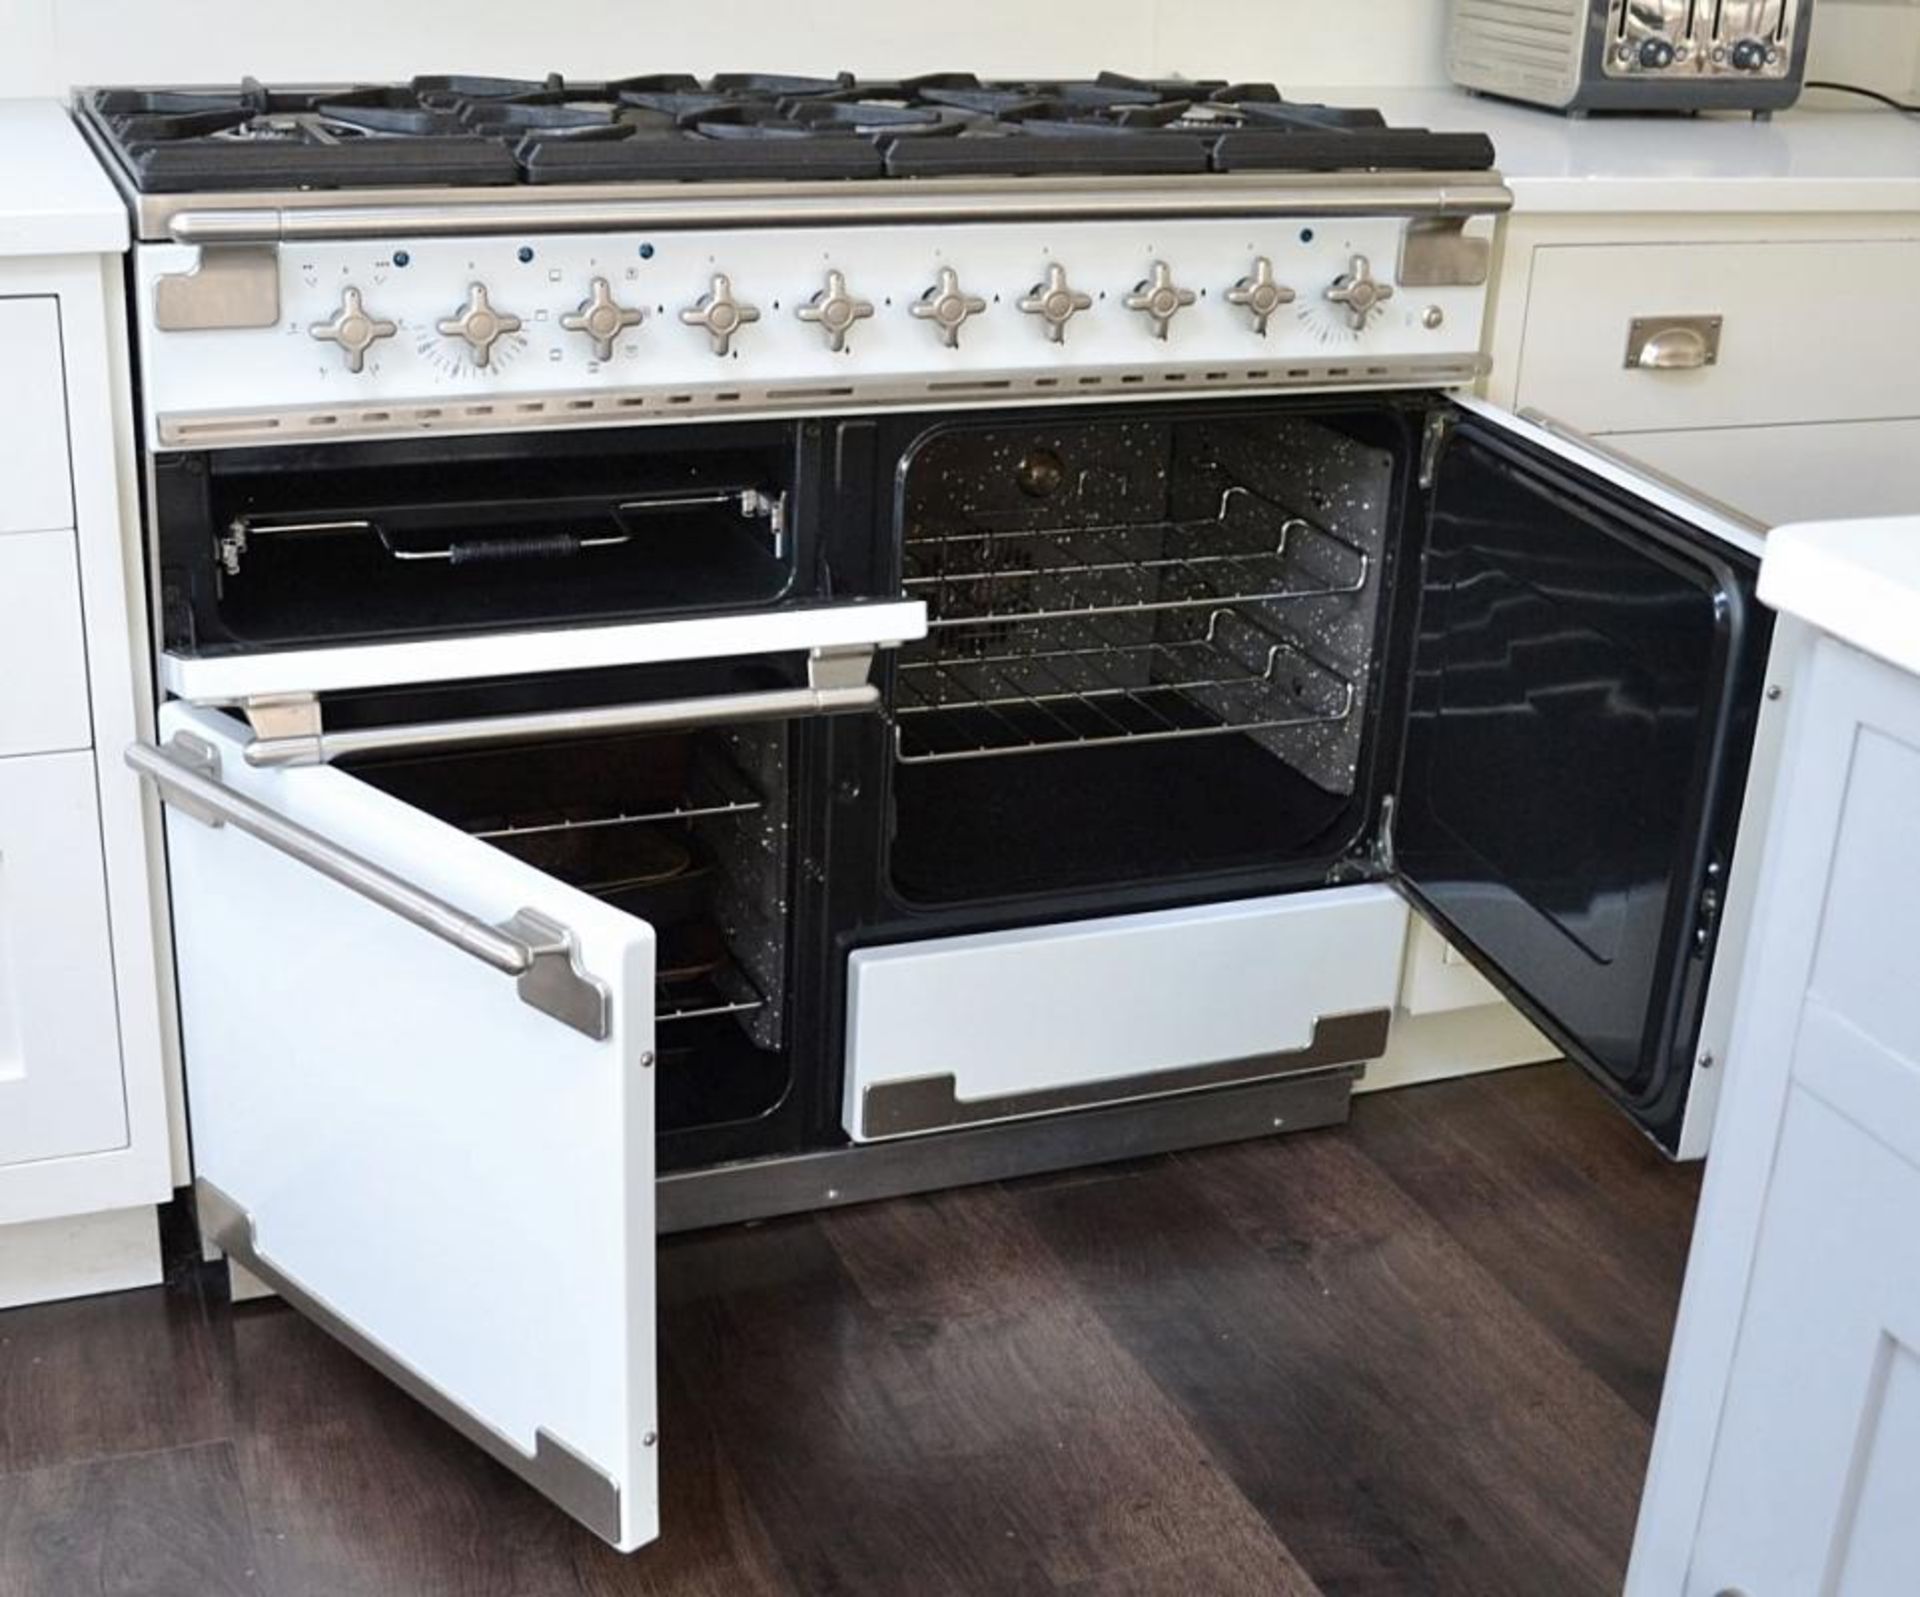 1 x Rangemaster Alise 110cm 6-Burner Gas Cooker In White And Brushed Steel - Used In Very Good, Clea - Image 4 of 5